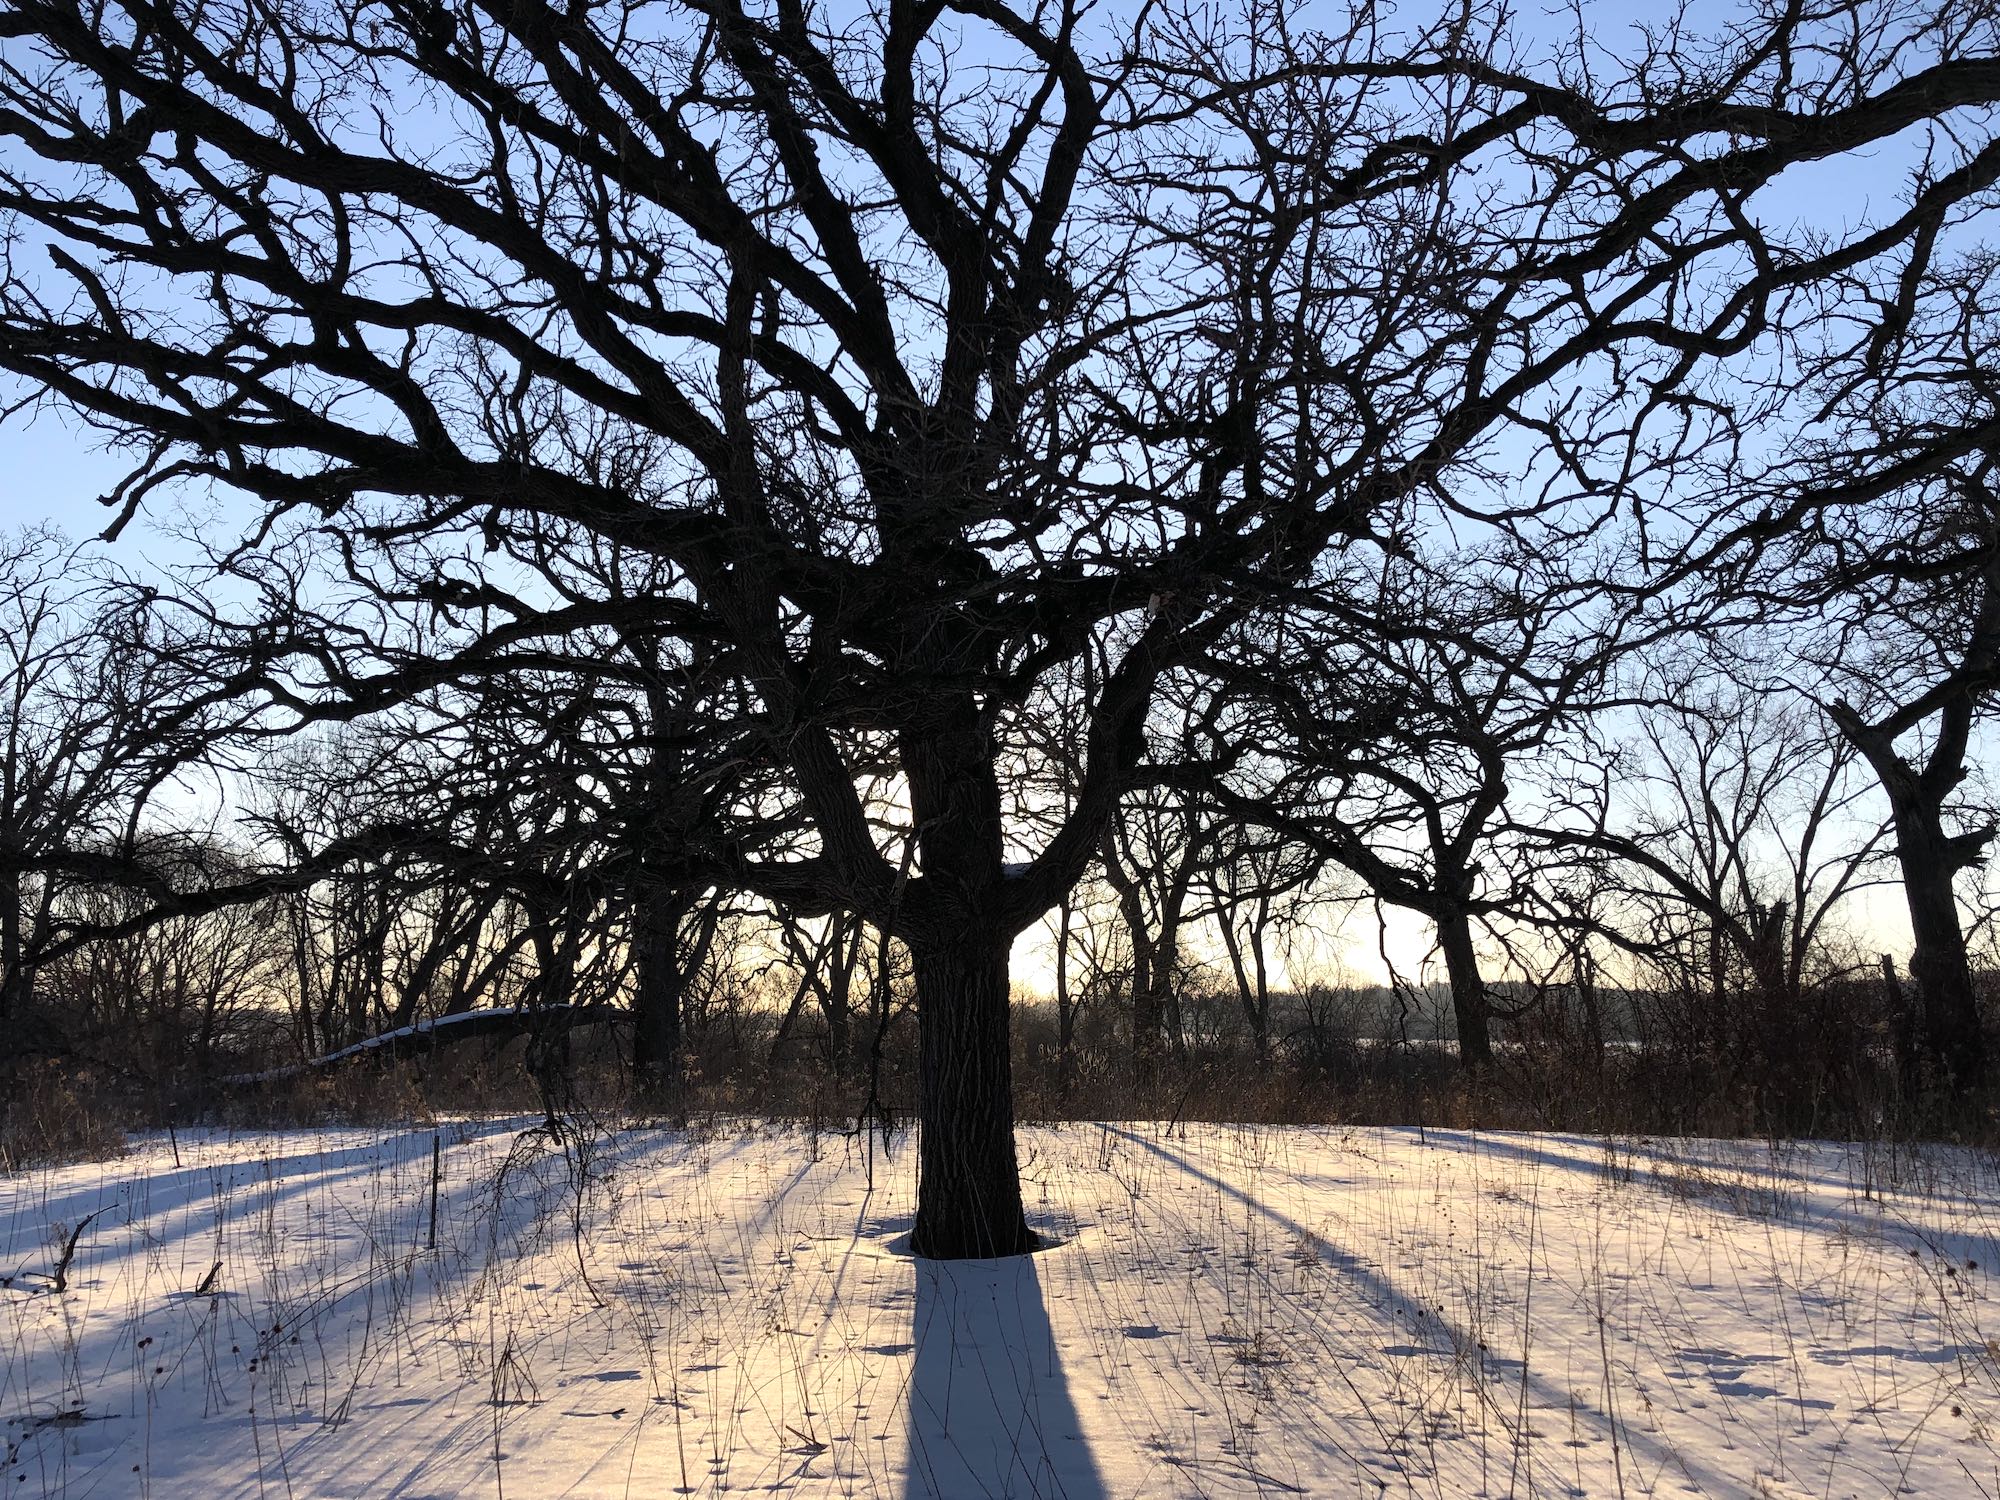 Oak Savanna on March 6, 2019 in University of Wisconsin Arboretum in Madison, Wisconsin on the north shore of Lake Wingra.